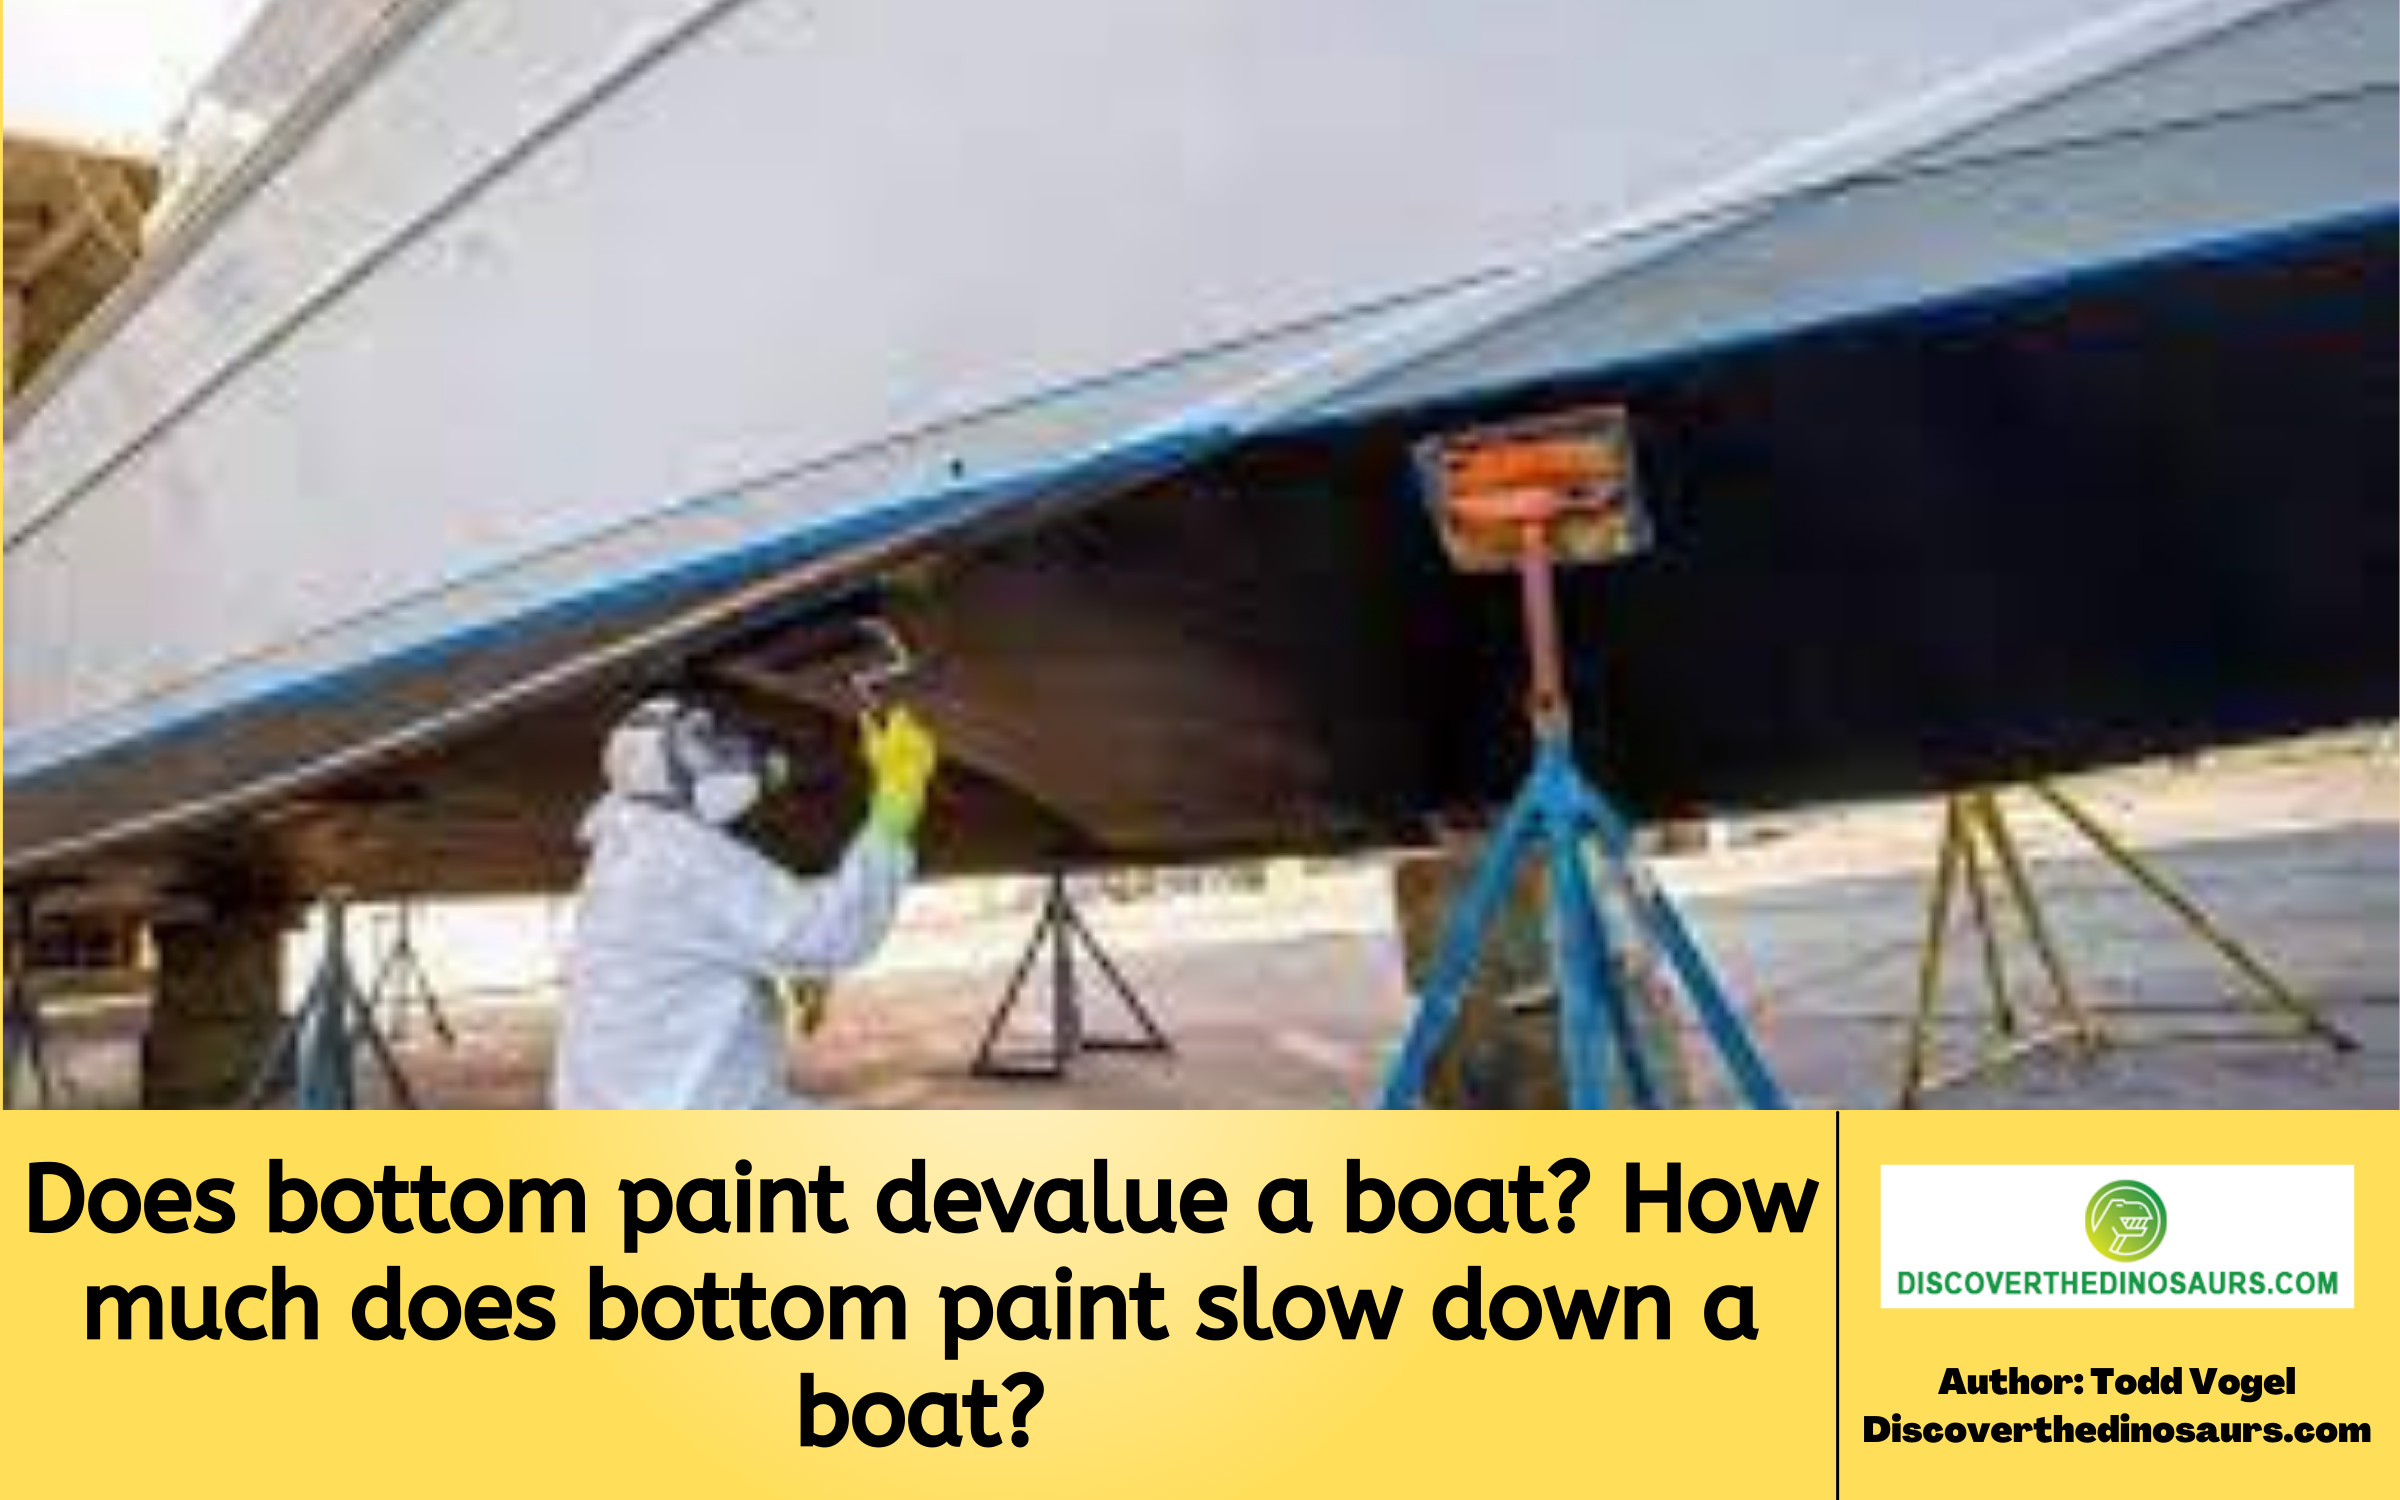 Does bottom paint devalue a boat?